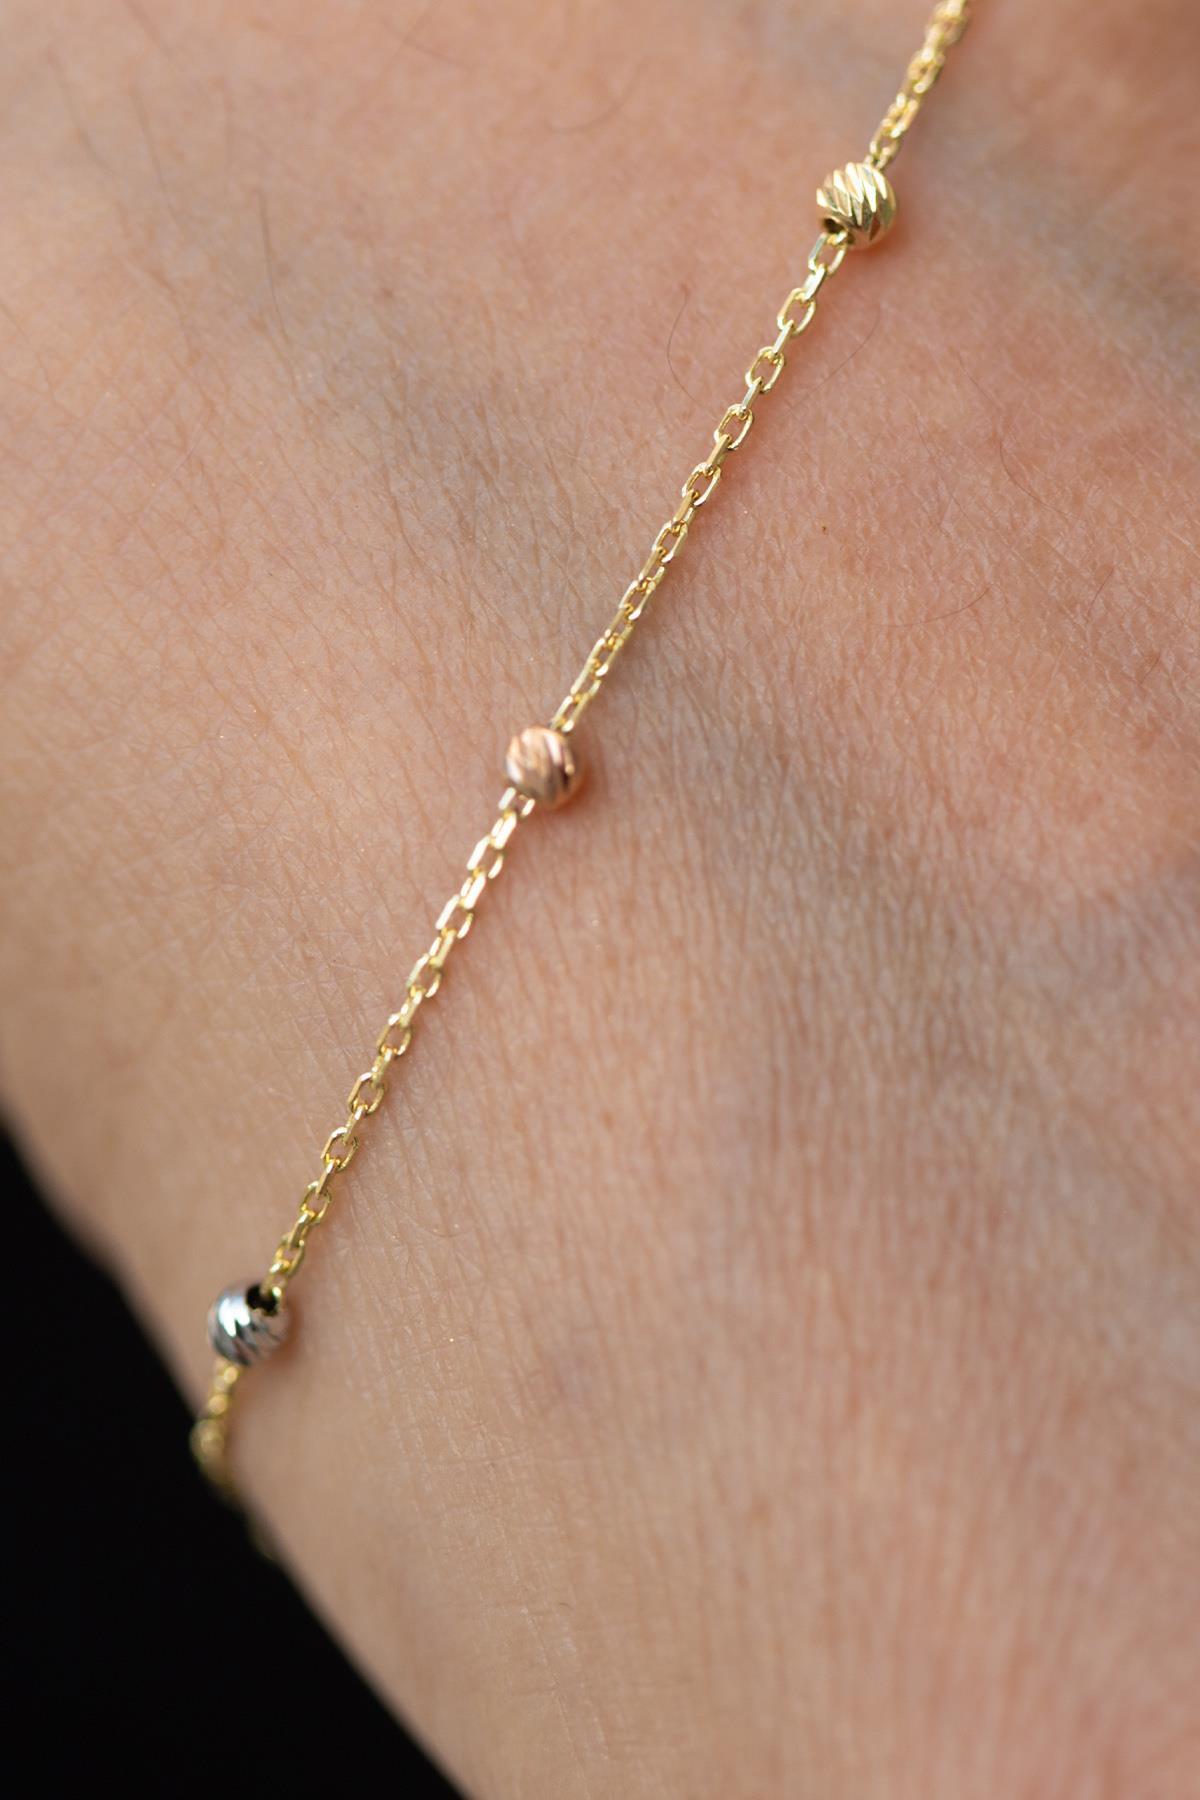 Buy 14K Gold Heart & Gold Filled Ball Bracelet Perfect for Valentine's Day  Online in India - Etsy